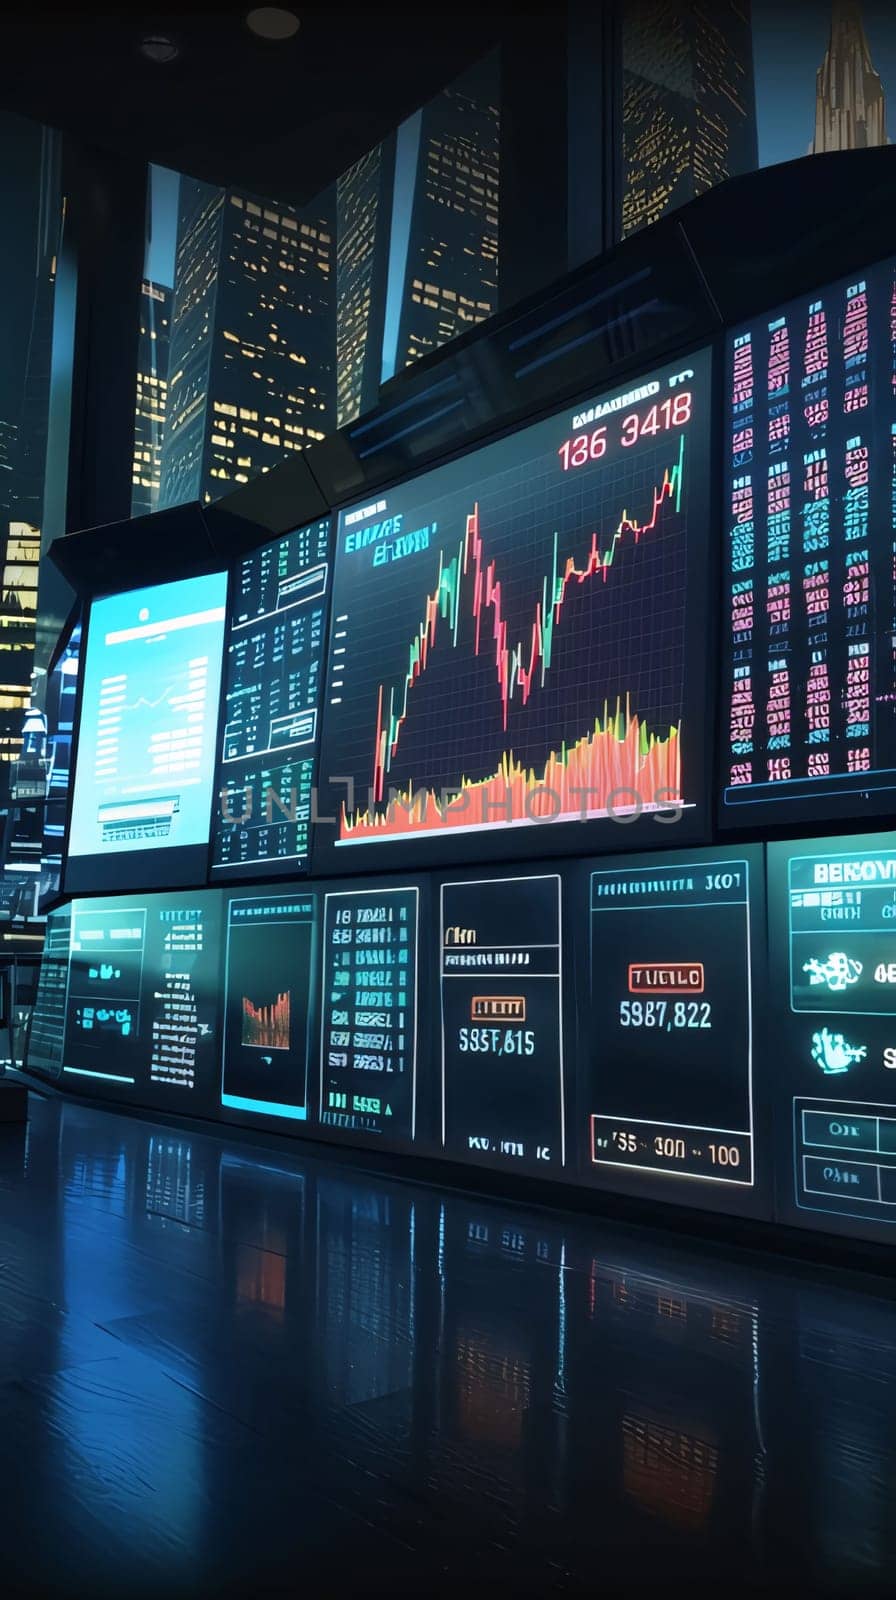 Stock market data on screen monitor in night city. 3D rendering by ThemesS